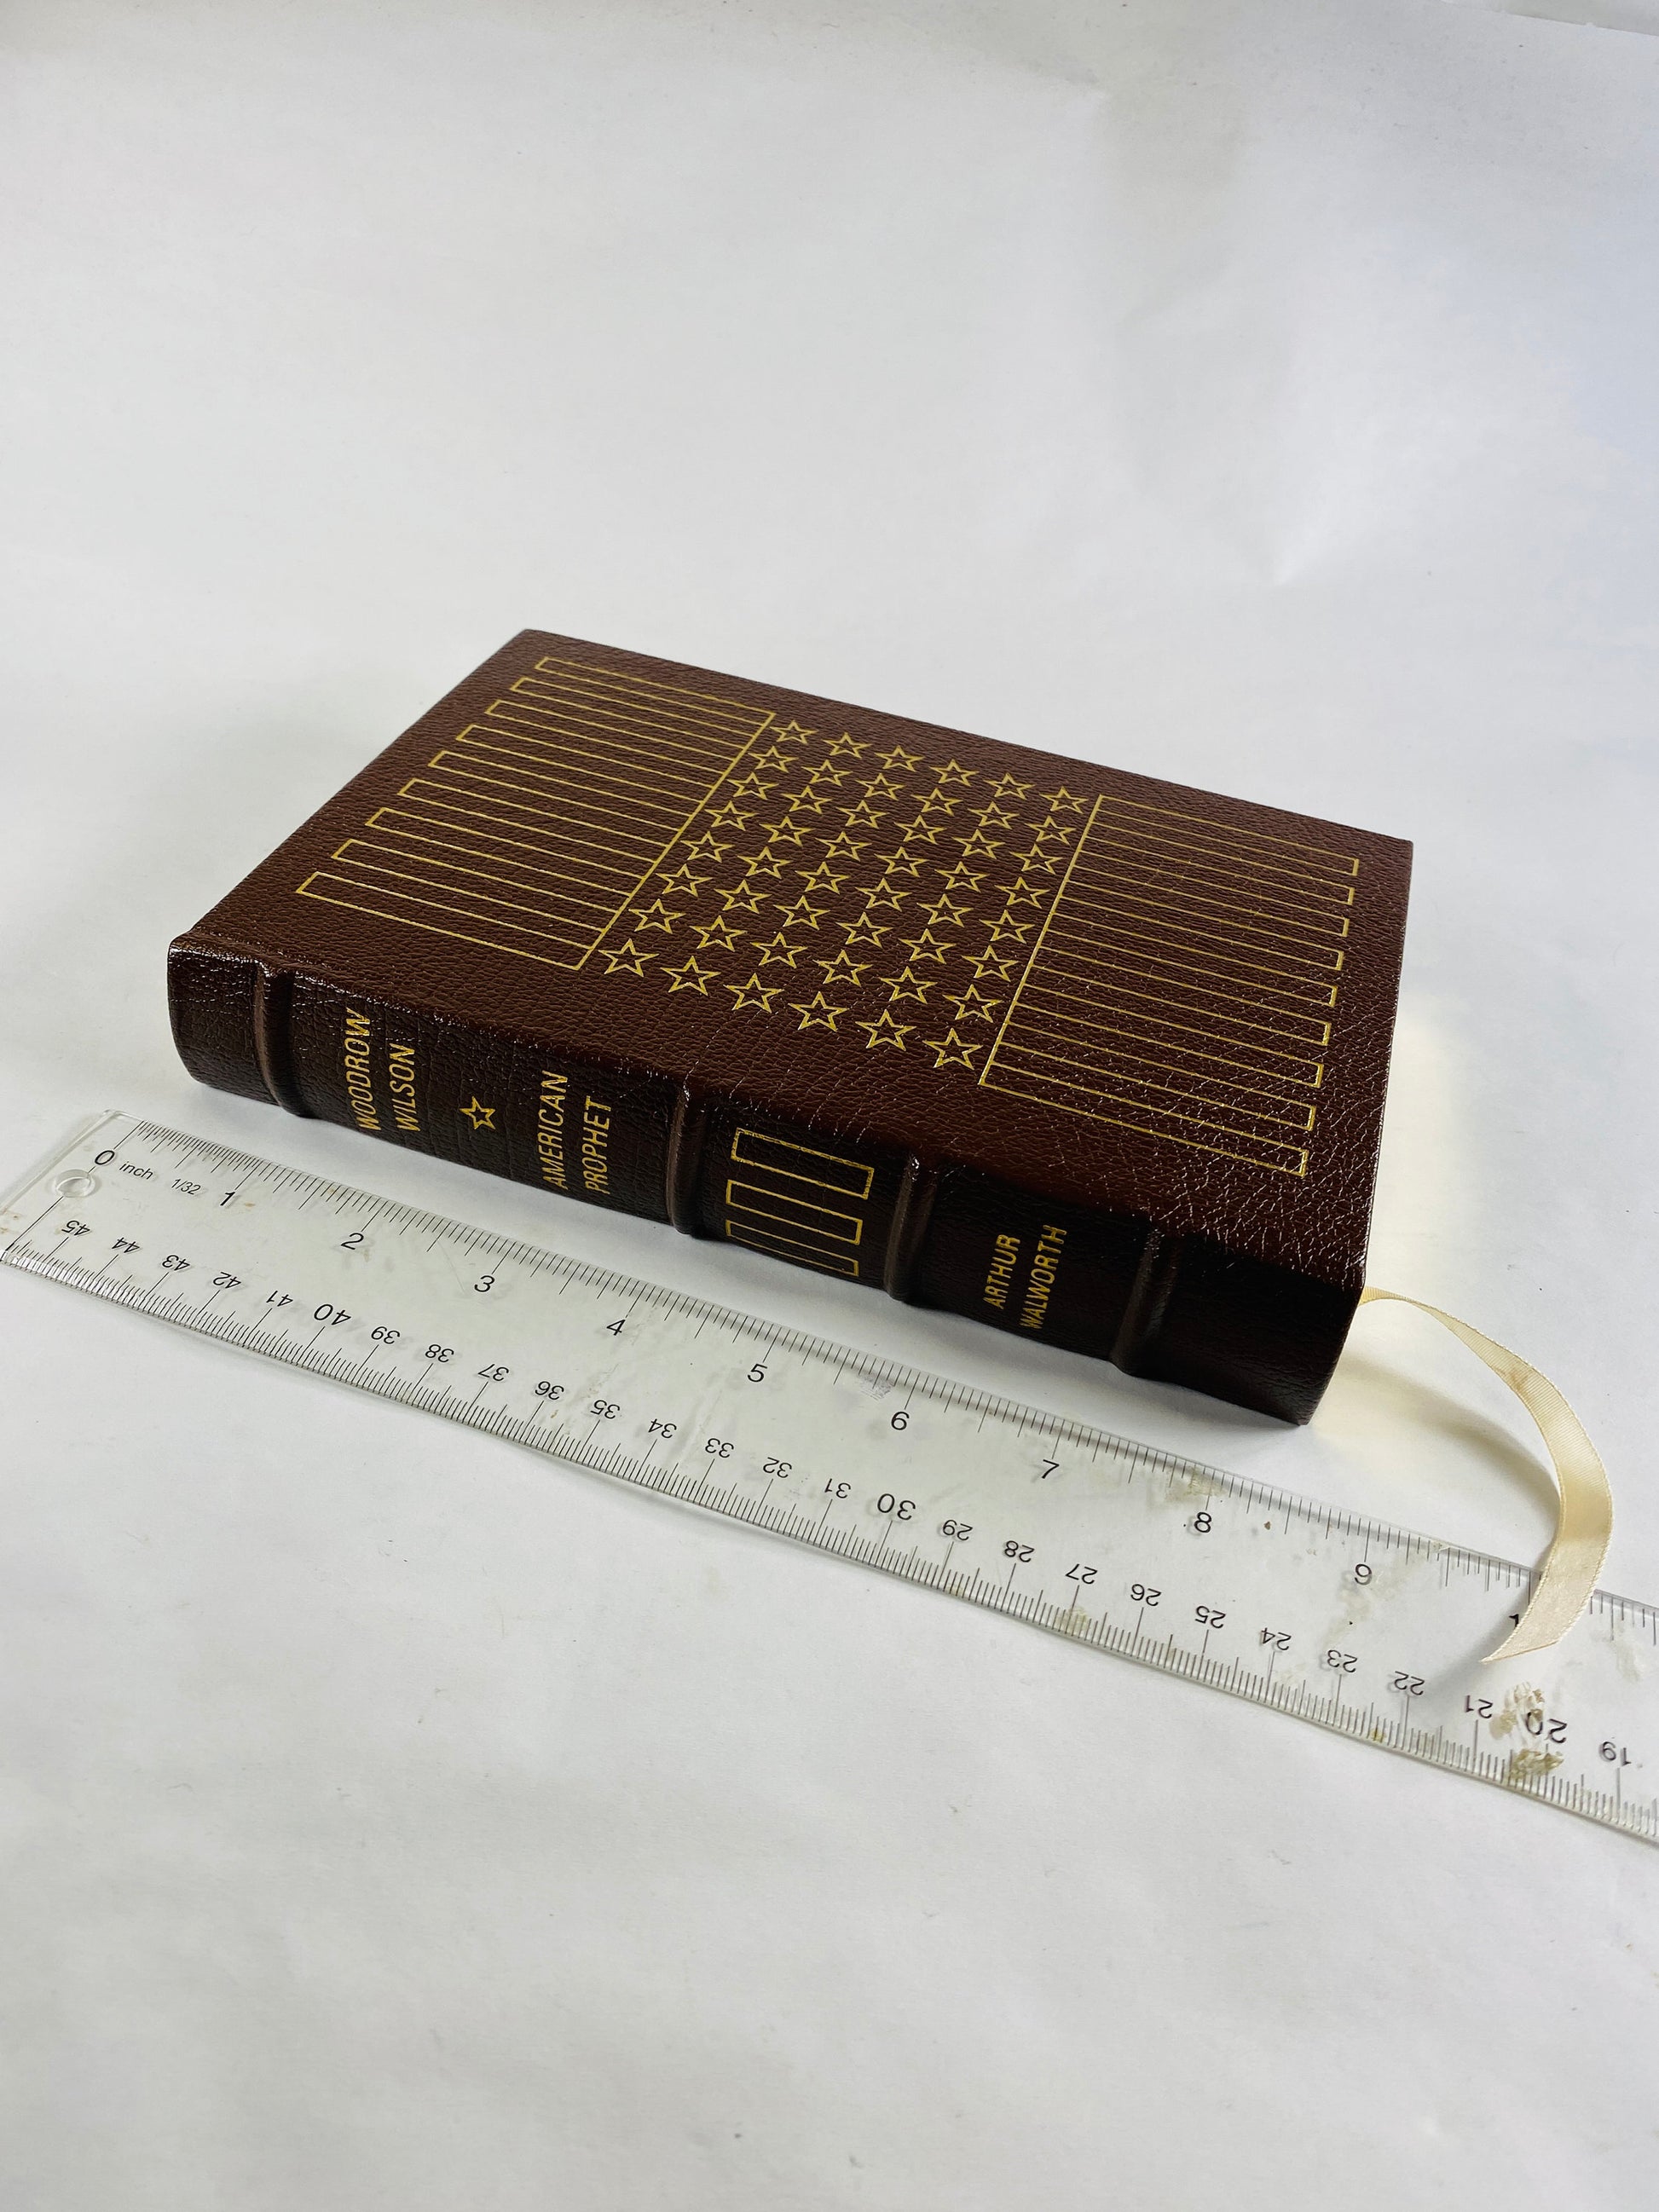 Woodrow Wilson American President vintage Easton Press book by Arthur Walworth circa 1978 BEAUTIFUL brown leather with gold gilt